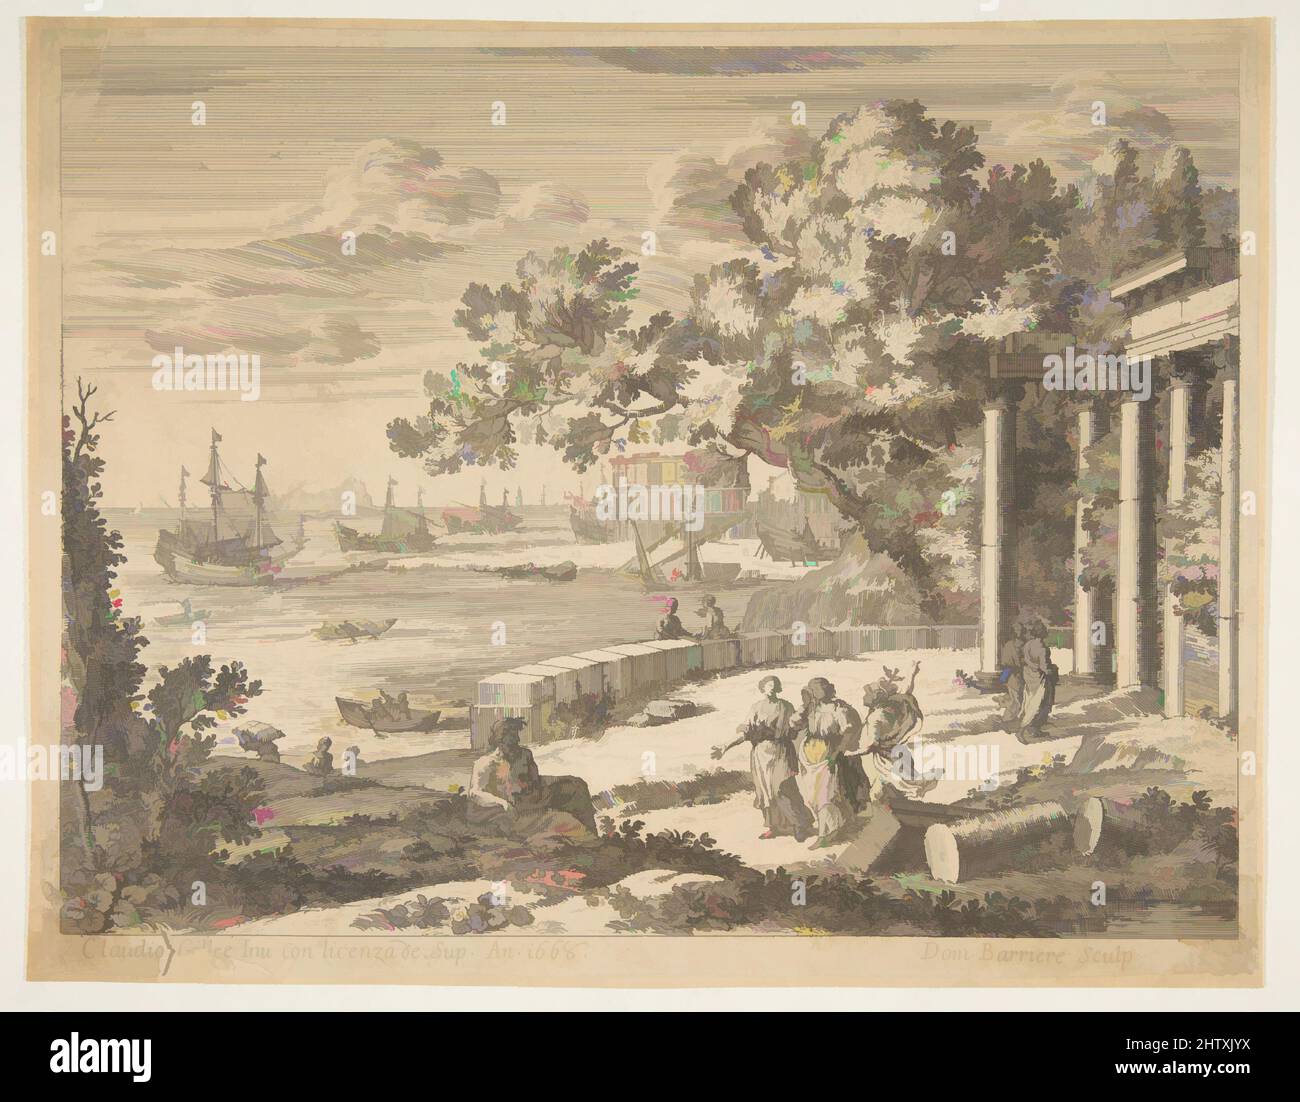 Art inspired by Landscape with Mercury, 1668, Etching, sheet: 7 7/8 x 10 3/16 in. (20 x 25.8 cm), Prints, After Claude Lorrain (Claude Gellée) (French, Chamagne 1604/5?–1682 Rome), Etched by Dominique Barrière (French, Marseille 1610–1678, Classic works modernized by Artotop with a splash of modernity. Shapes, color and value, eye-catching visual impact on art. Emotions through freedom of artworks in a contemporary way. A timeless message pursuing a wildly creative new direction. Artists turning to the digital medium and creating the Artotop NFT Stock Photo